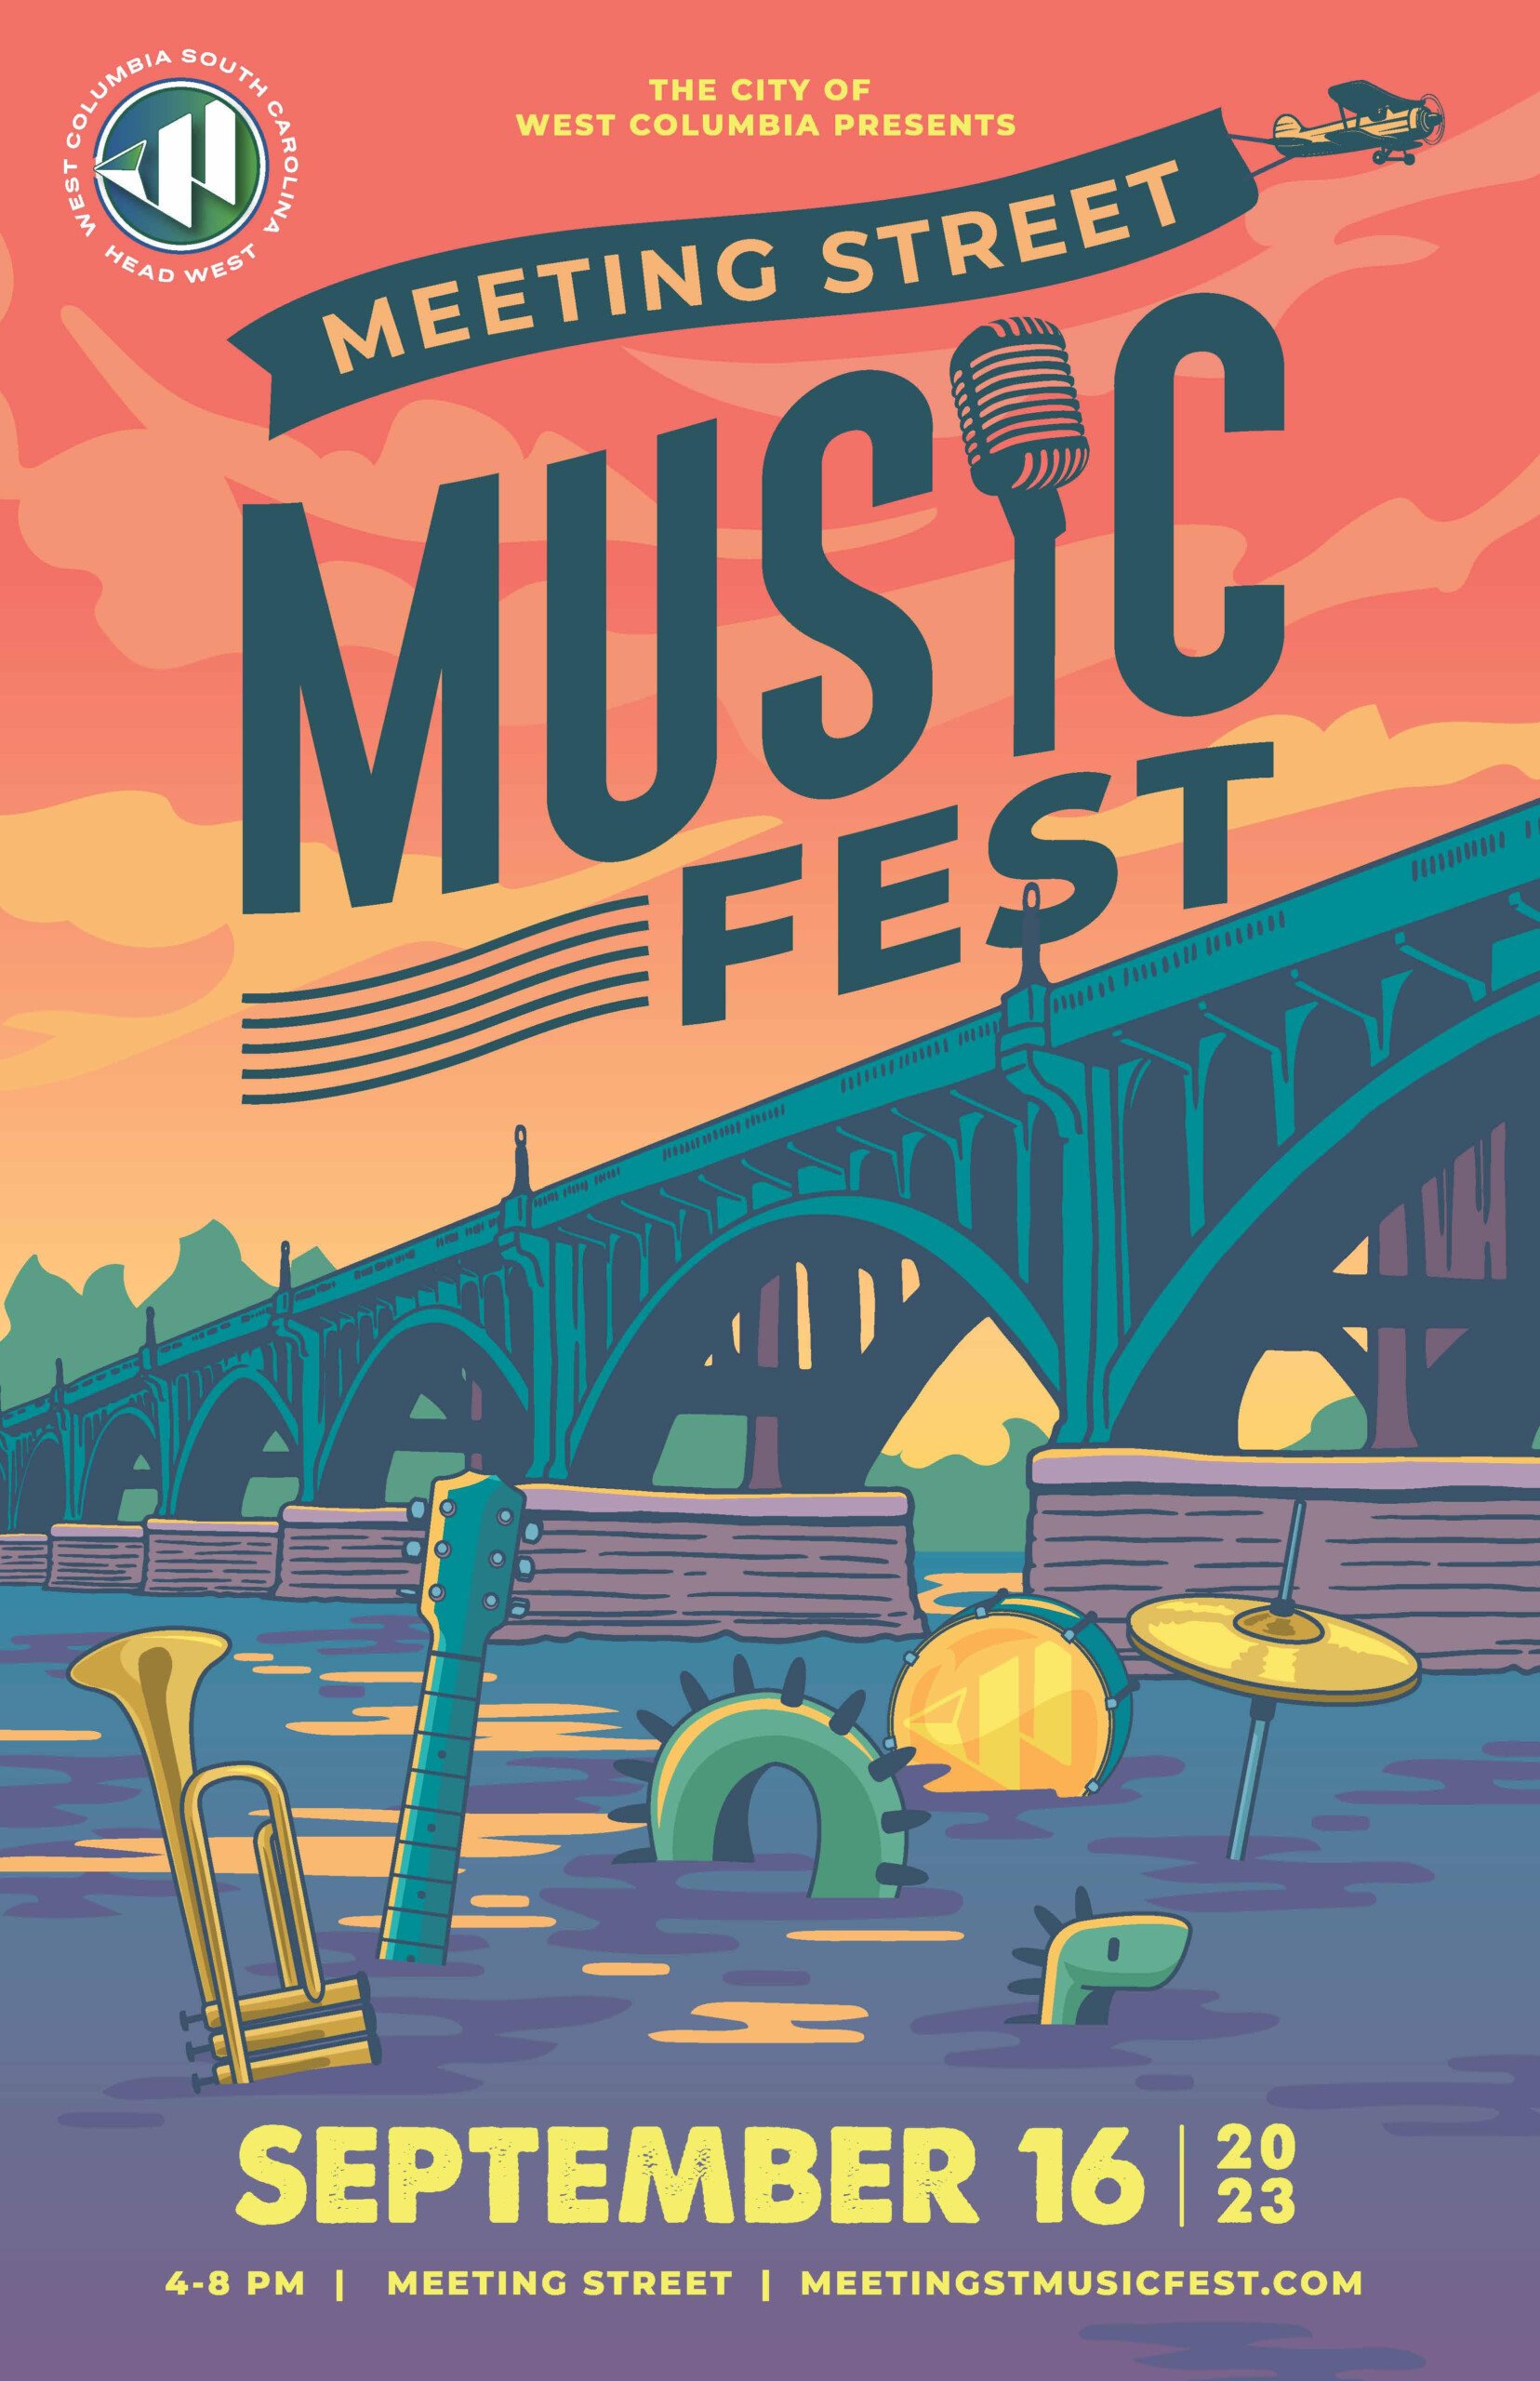 City of West Columbia to launch new music festival this year ABC Columbia